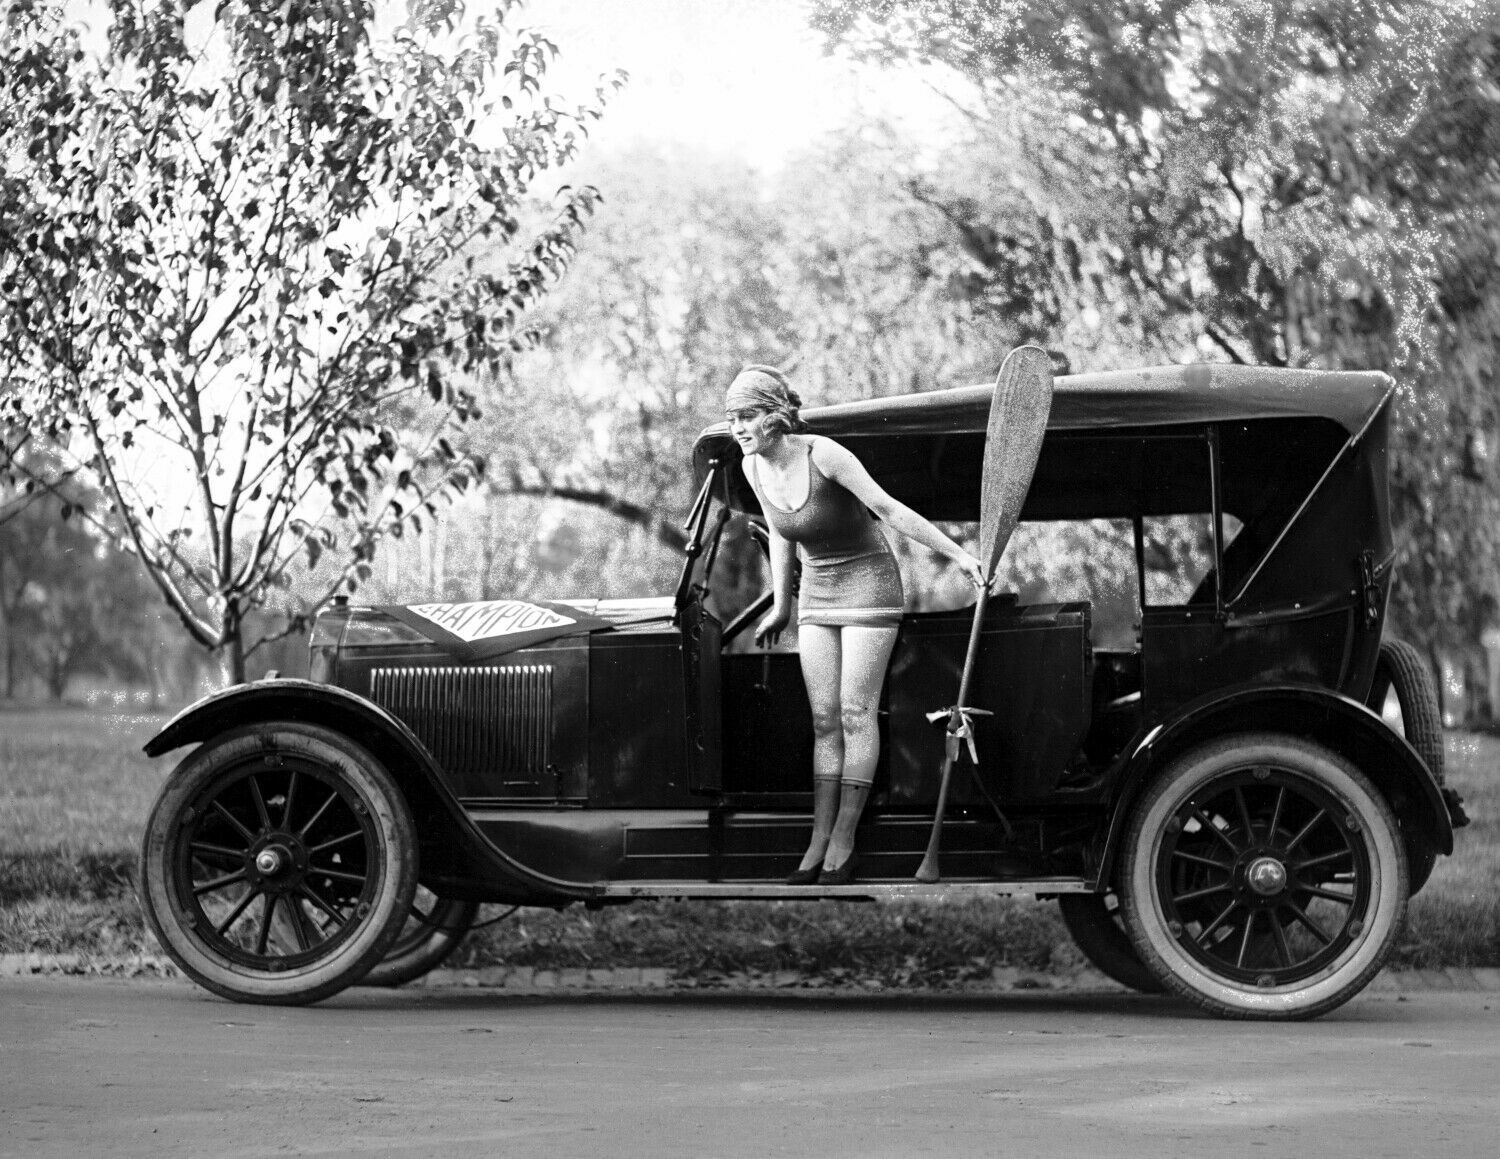 1920 Bathing Beauty in Swimsuit on Car Vintage Old Photo 8.5